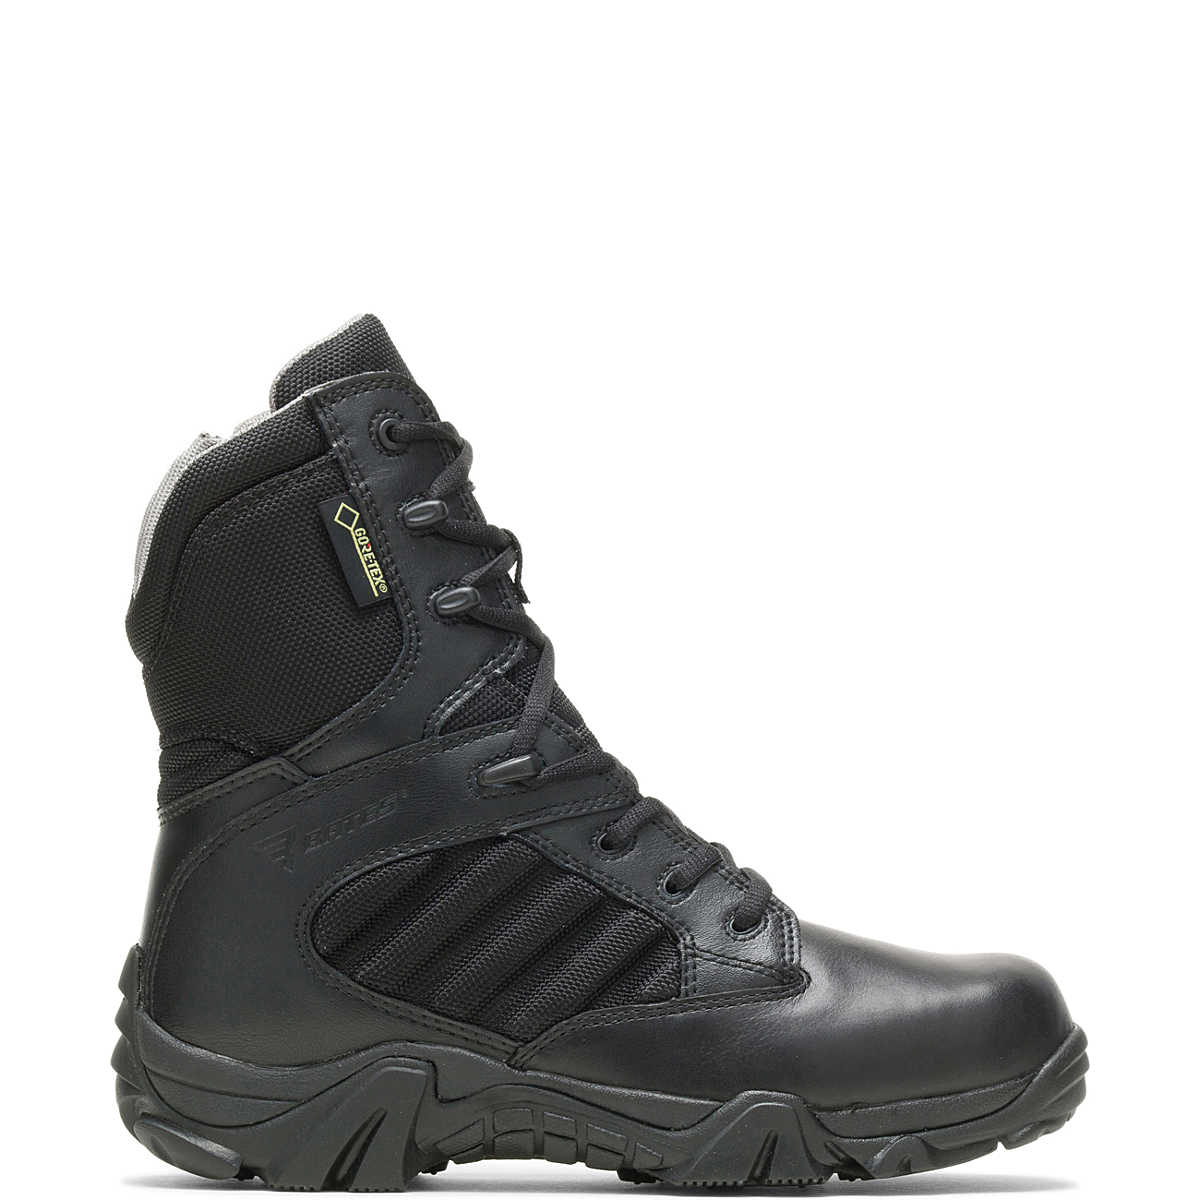 GX-8 Side Zip Boot with GORE-TEX®, Black, dynamic 1